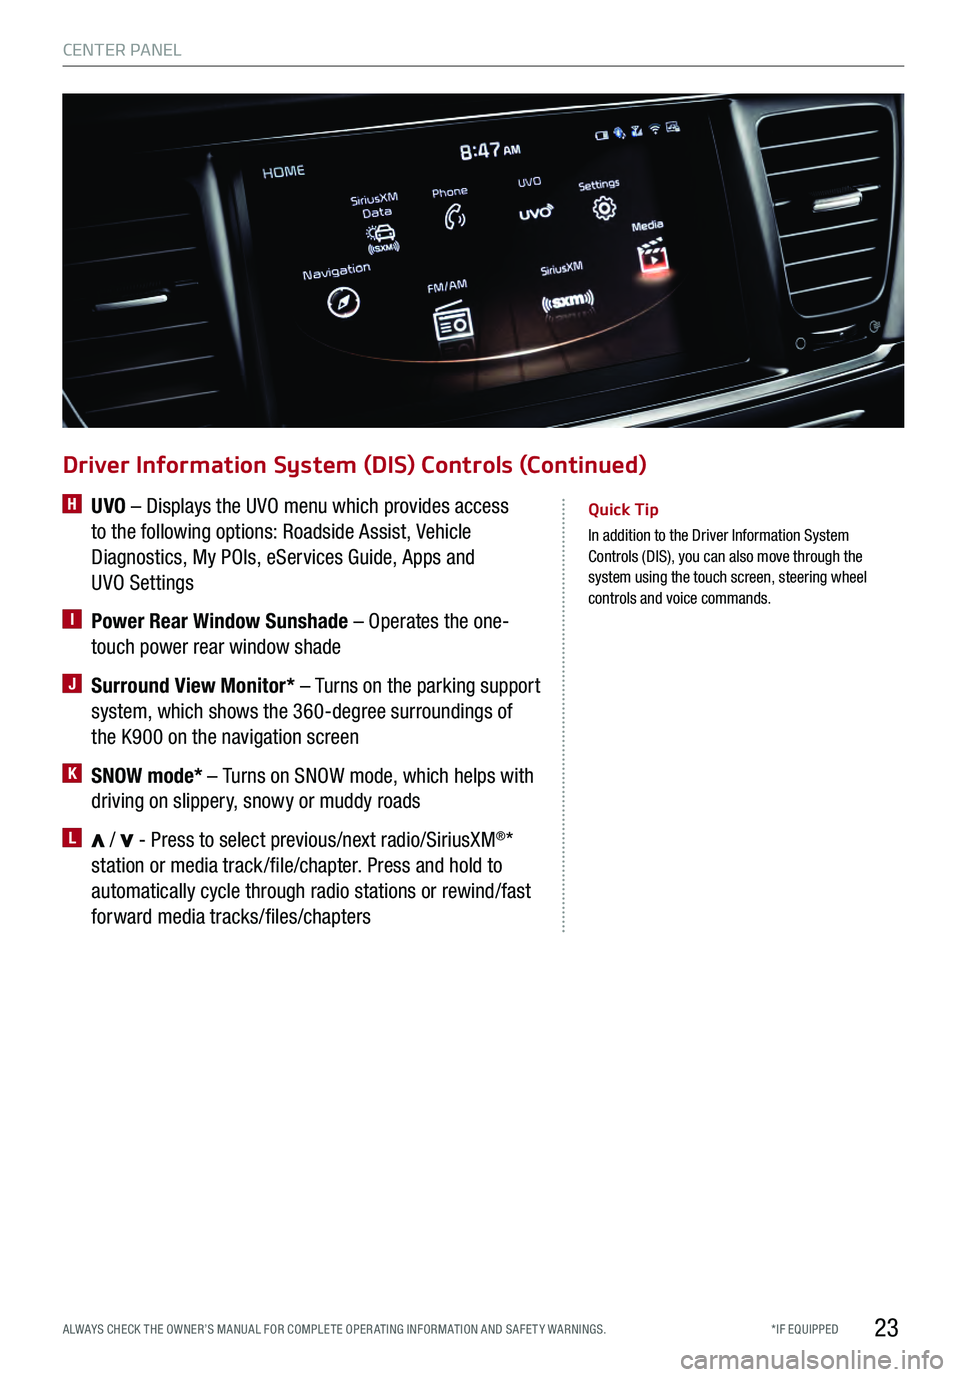 KIA K900 2017  Features and Functions Guide 23
Quick Tip
 In addition to the Driver Information System 
Control s (DIS), you can also move through the 
system using the touch screen, steering wheel 
controls and voice commands.
Driver Informati